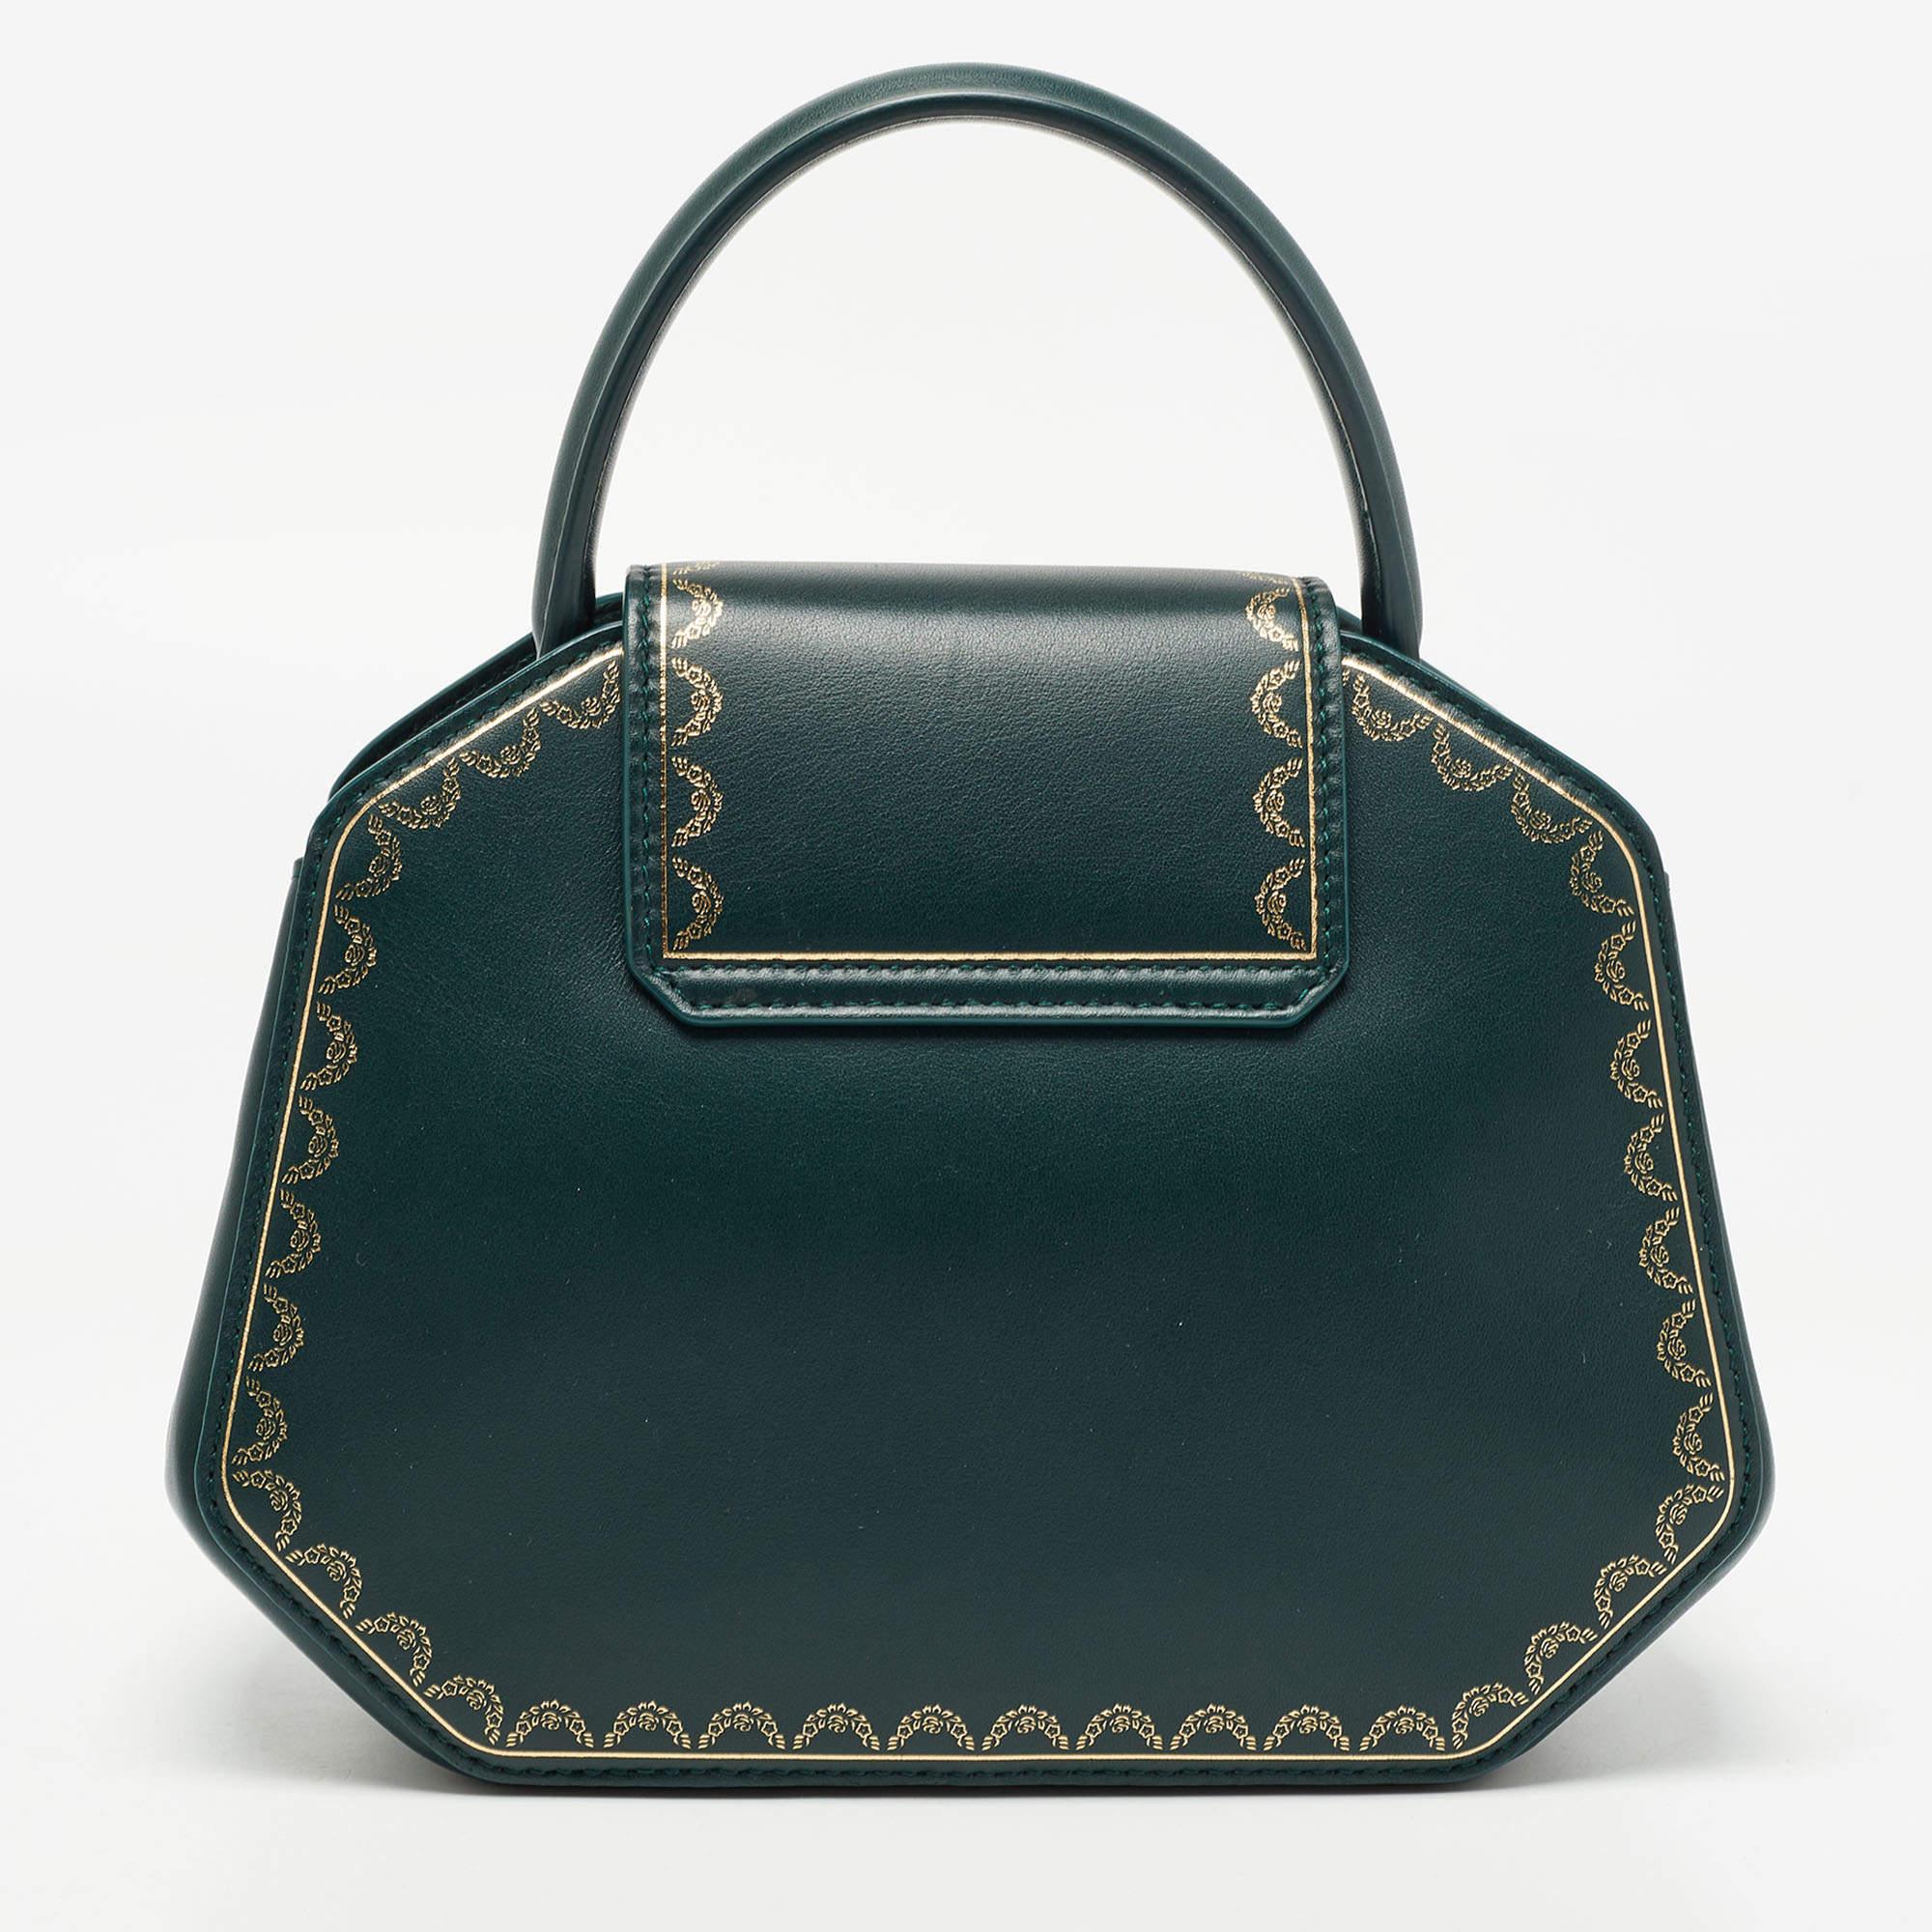 Displaying exquisite craftsmanship, this fabulous Cartier bag will certainly live up to your expectations. Featuring a chic design, it is made from luxe materials and has a roomy interior for carrying your essentials.

Includes: Original Dustbag,